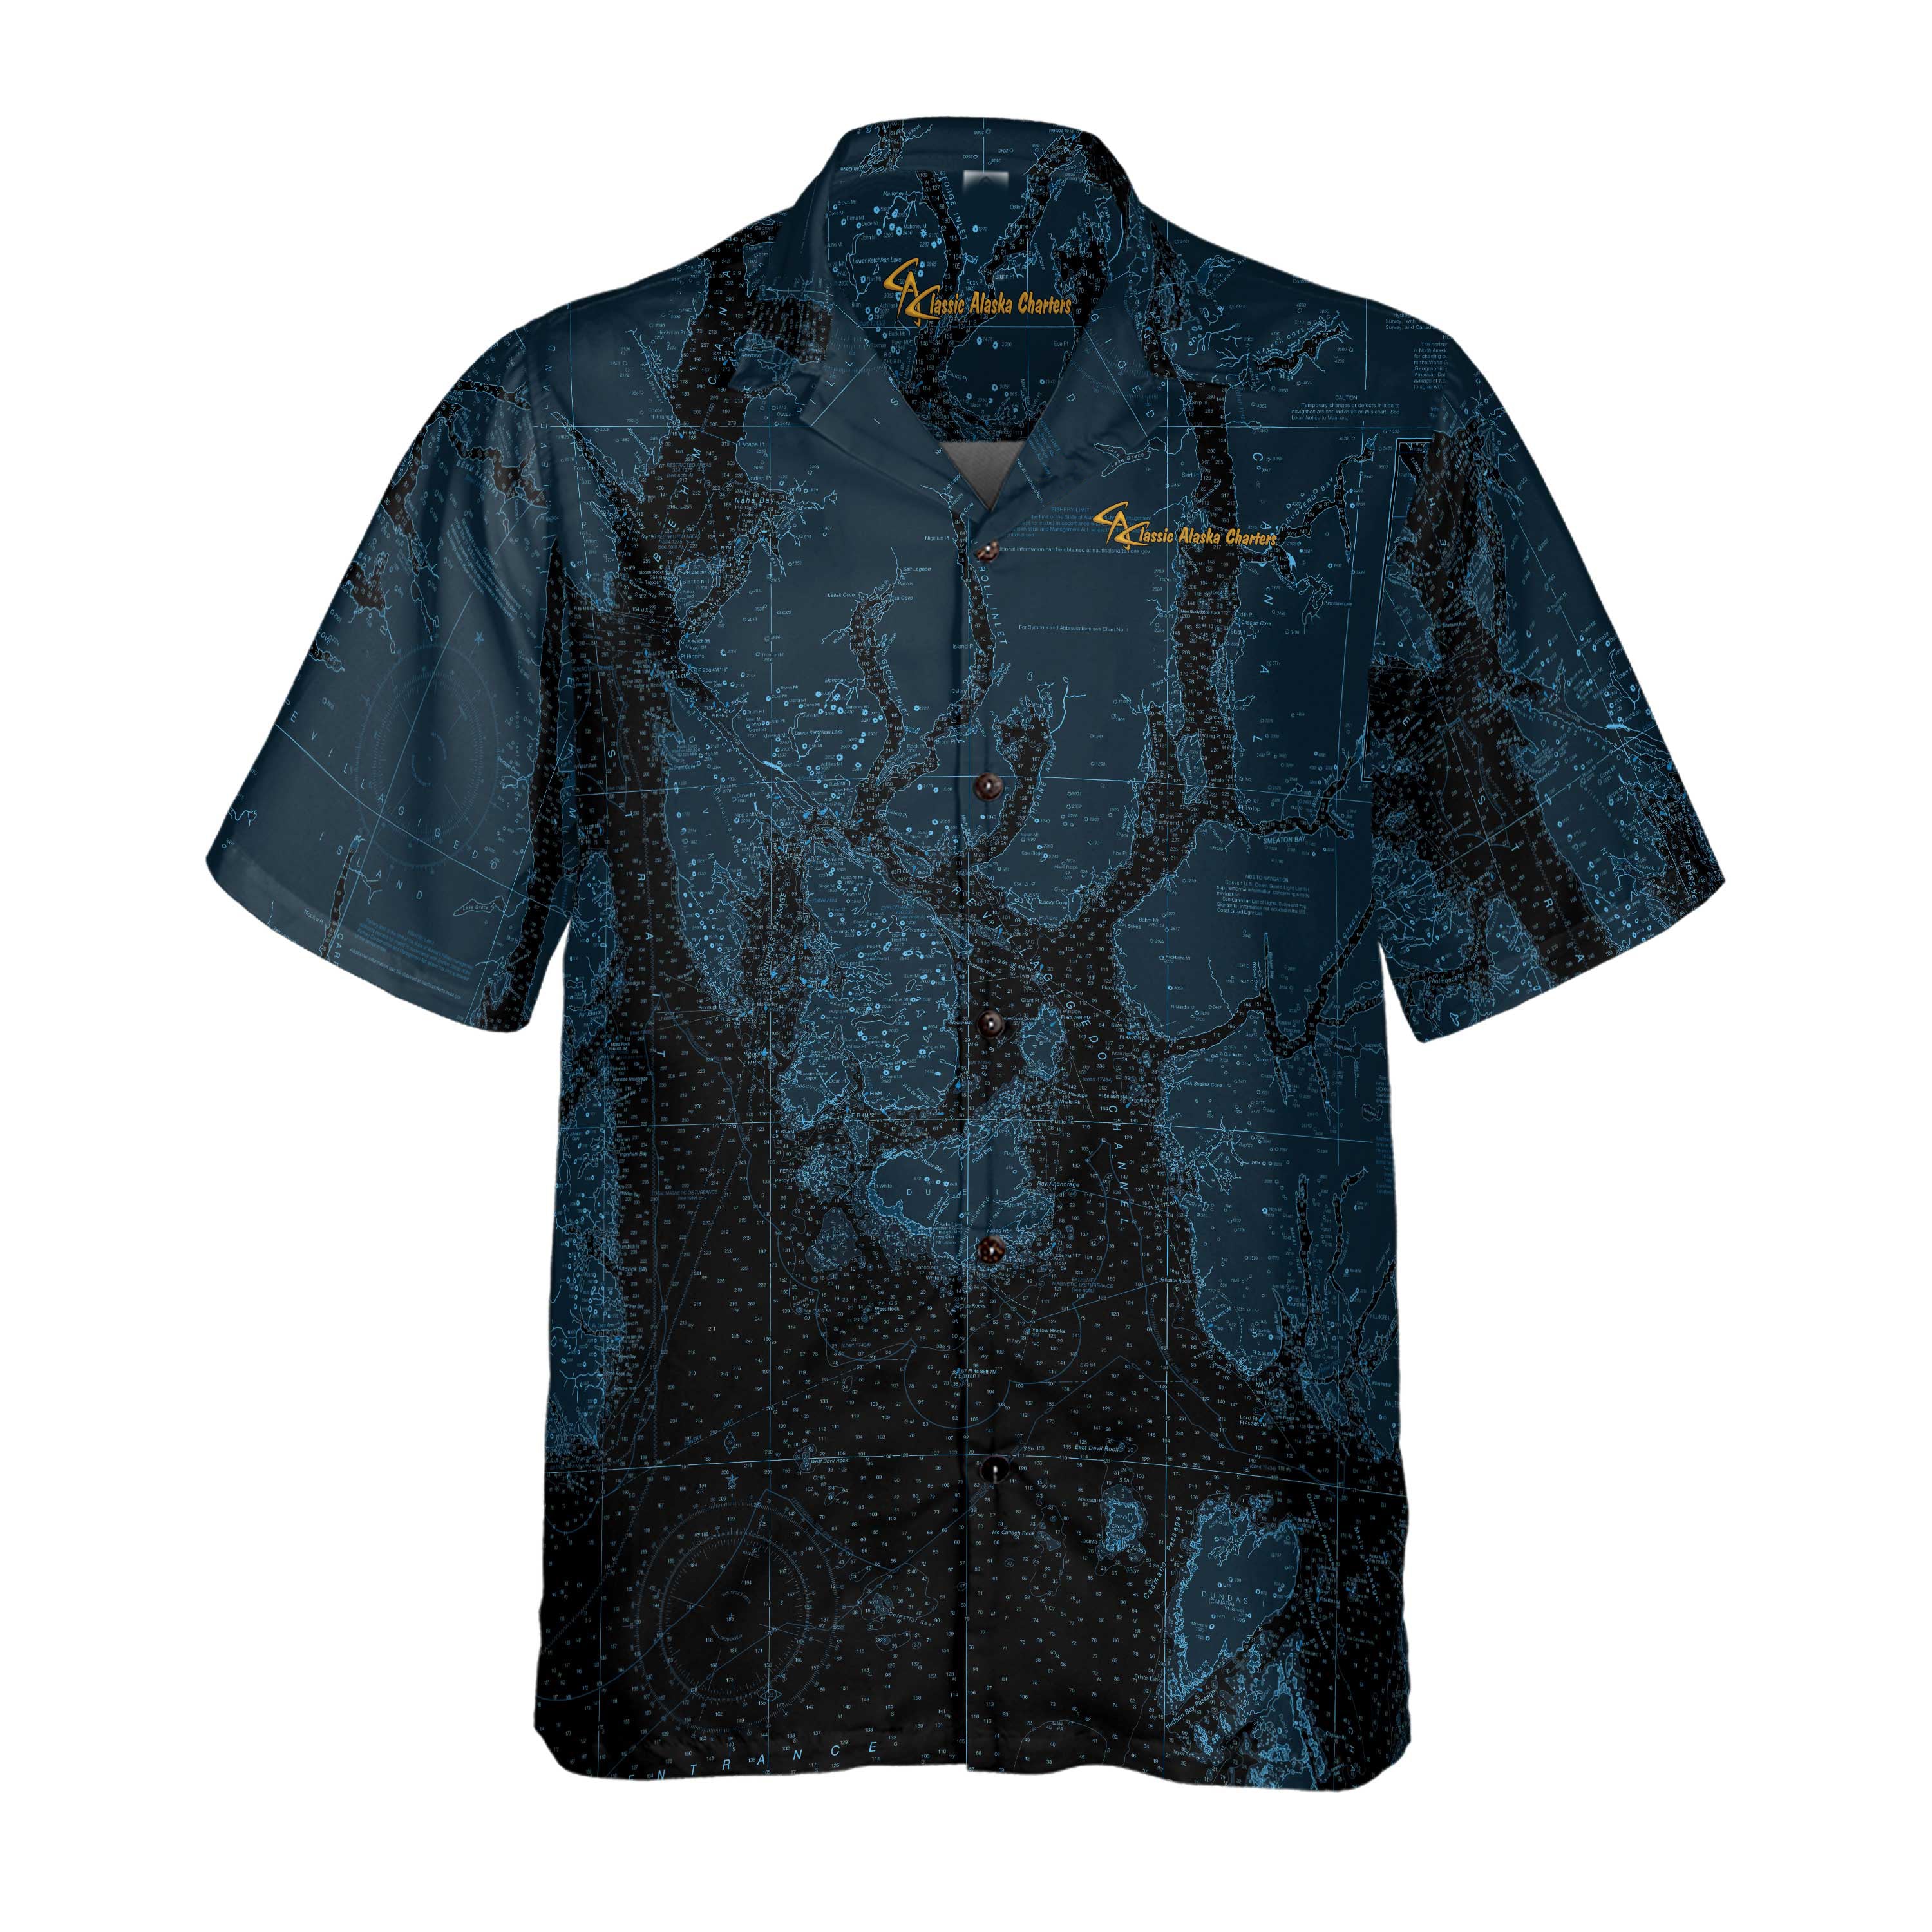 The CAC Midnight Blue Coconut Button Camp Shirt